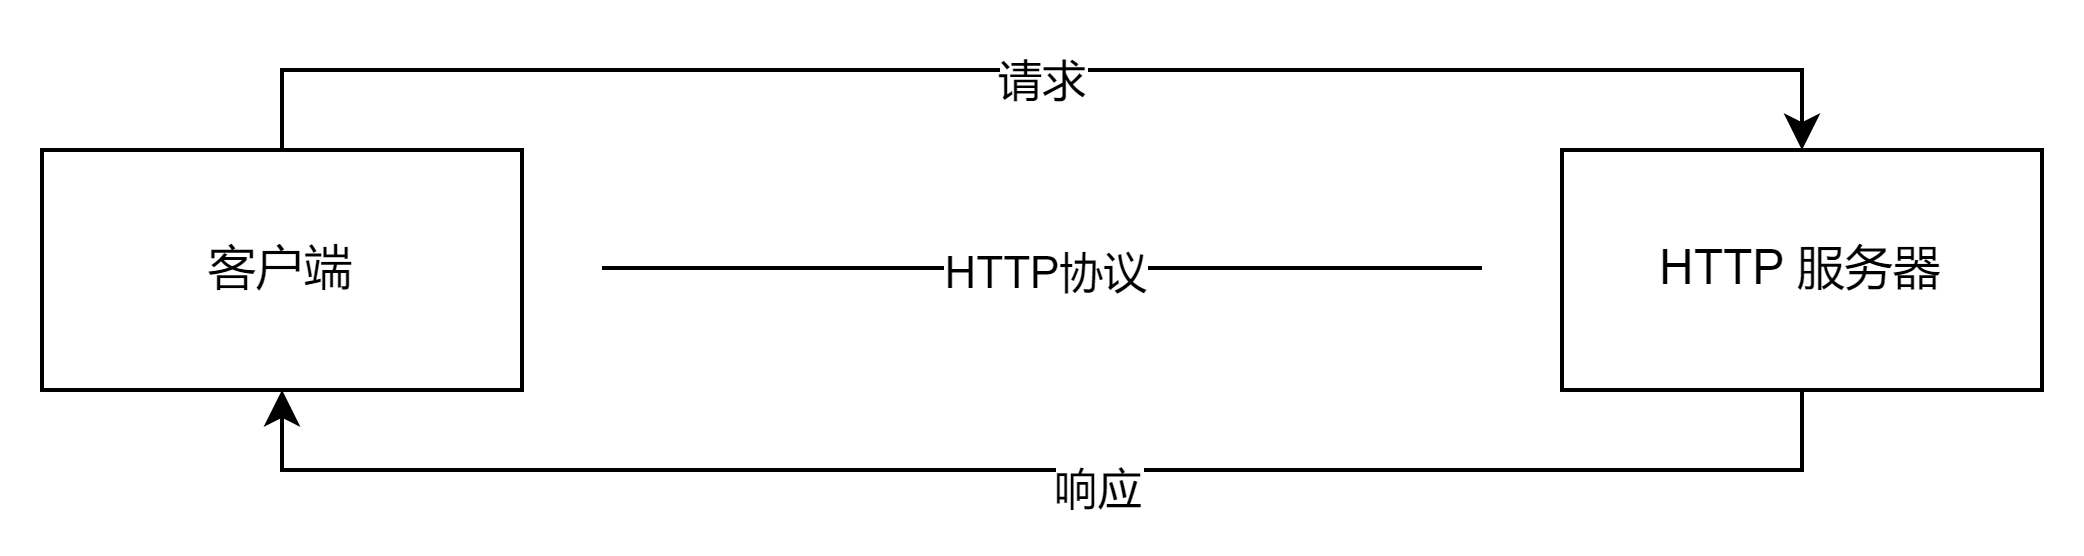 nginx<span style='color:red;'>与</span><span style='color:red;'>tomcat</span><span style='color:red;'>的</span>区别？